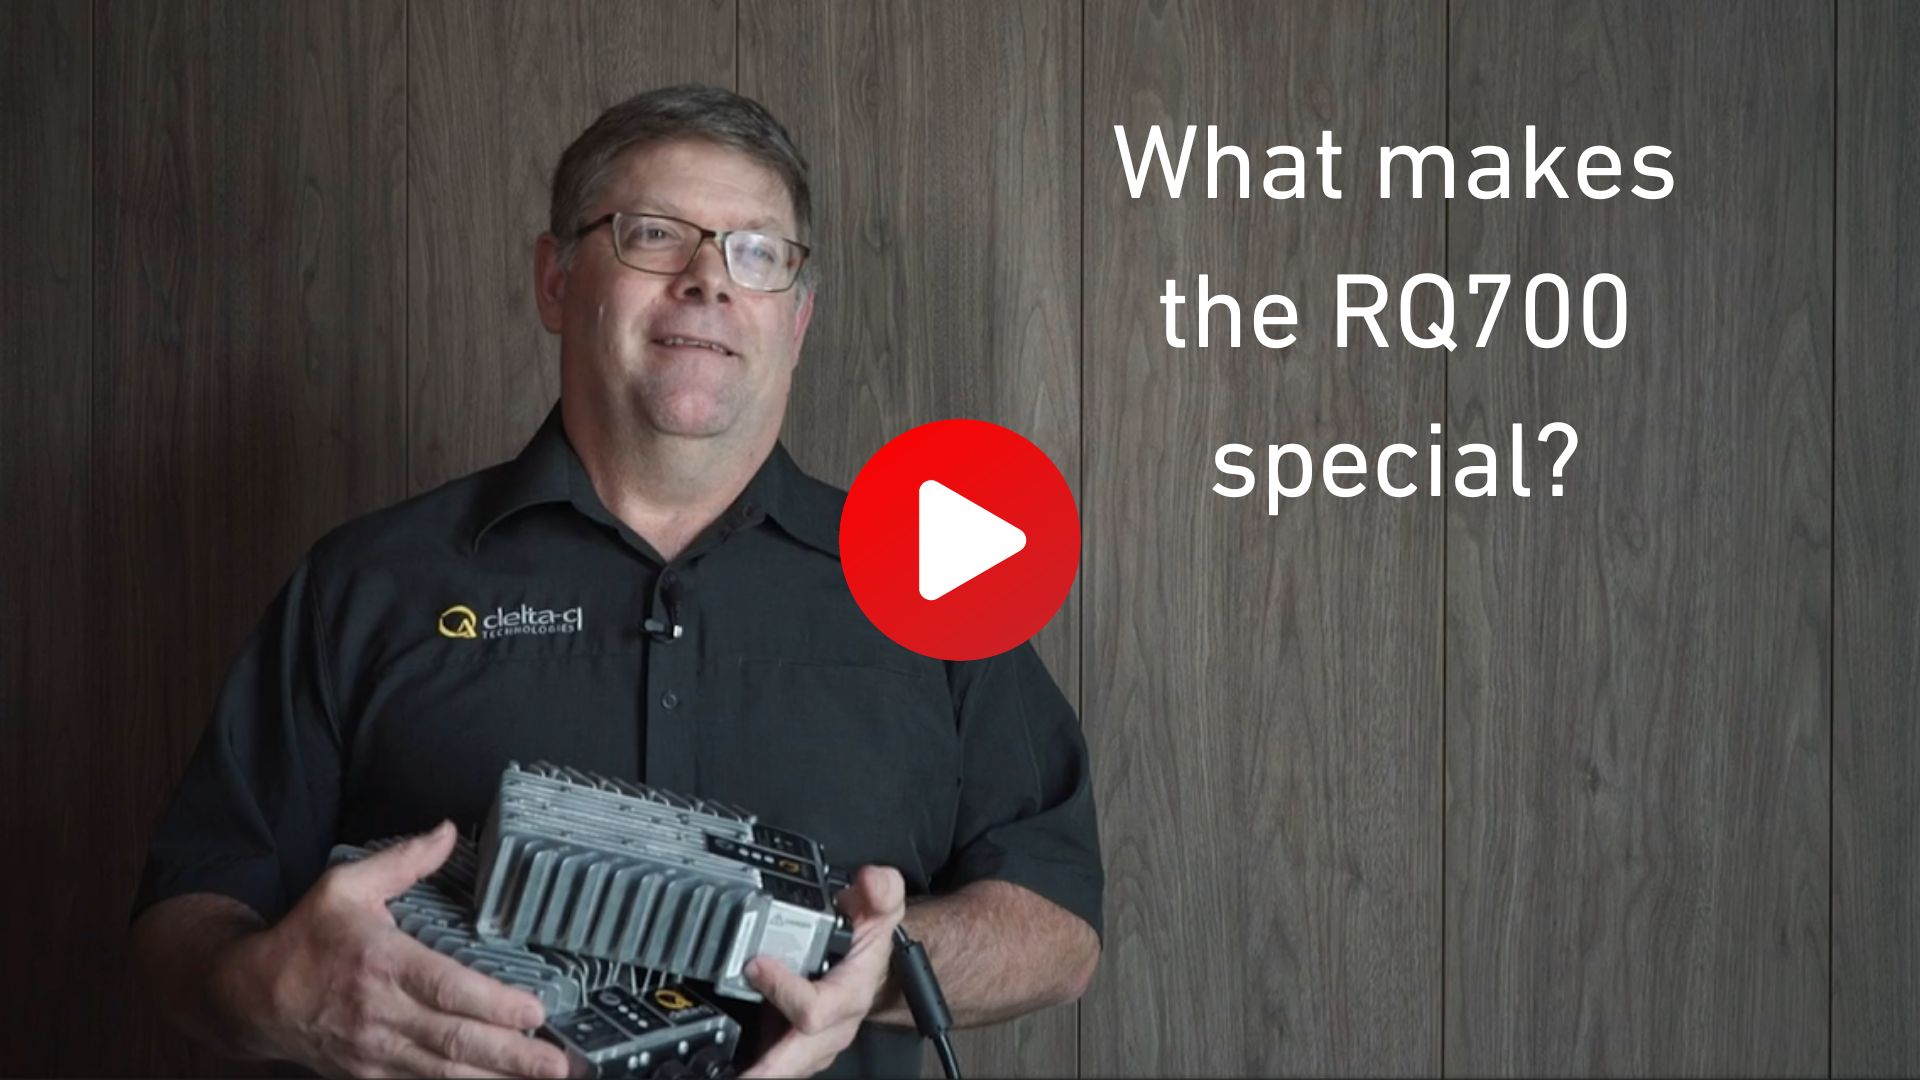 What makes the RQ700 special?